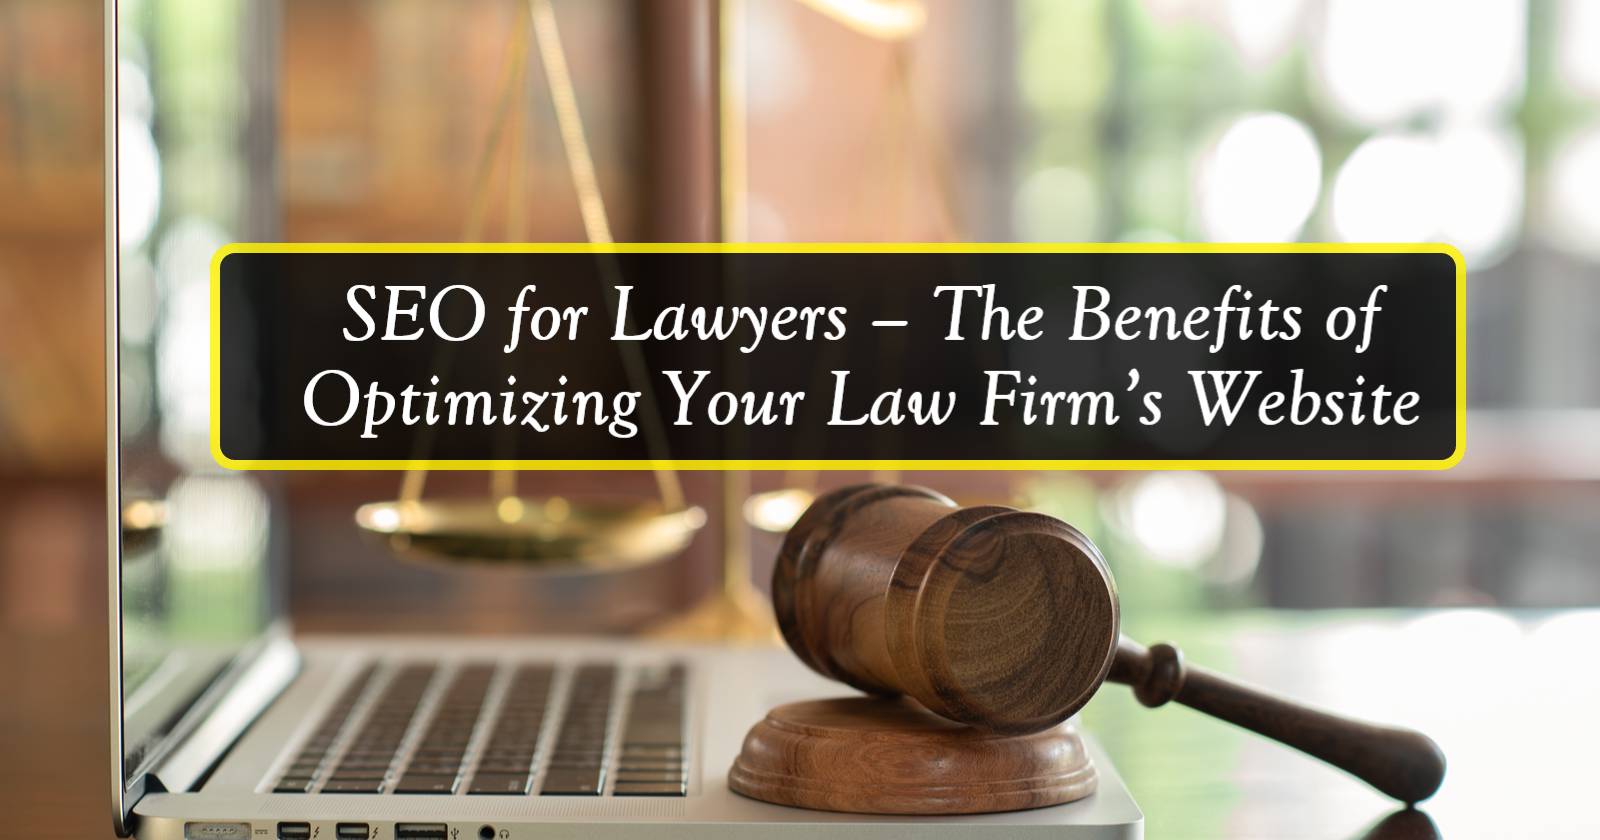 SEO for Lawyers The Benefits of Optimizing Your Law Firm’s Website